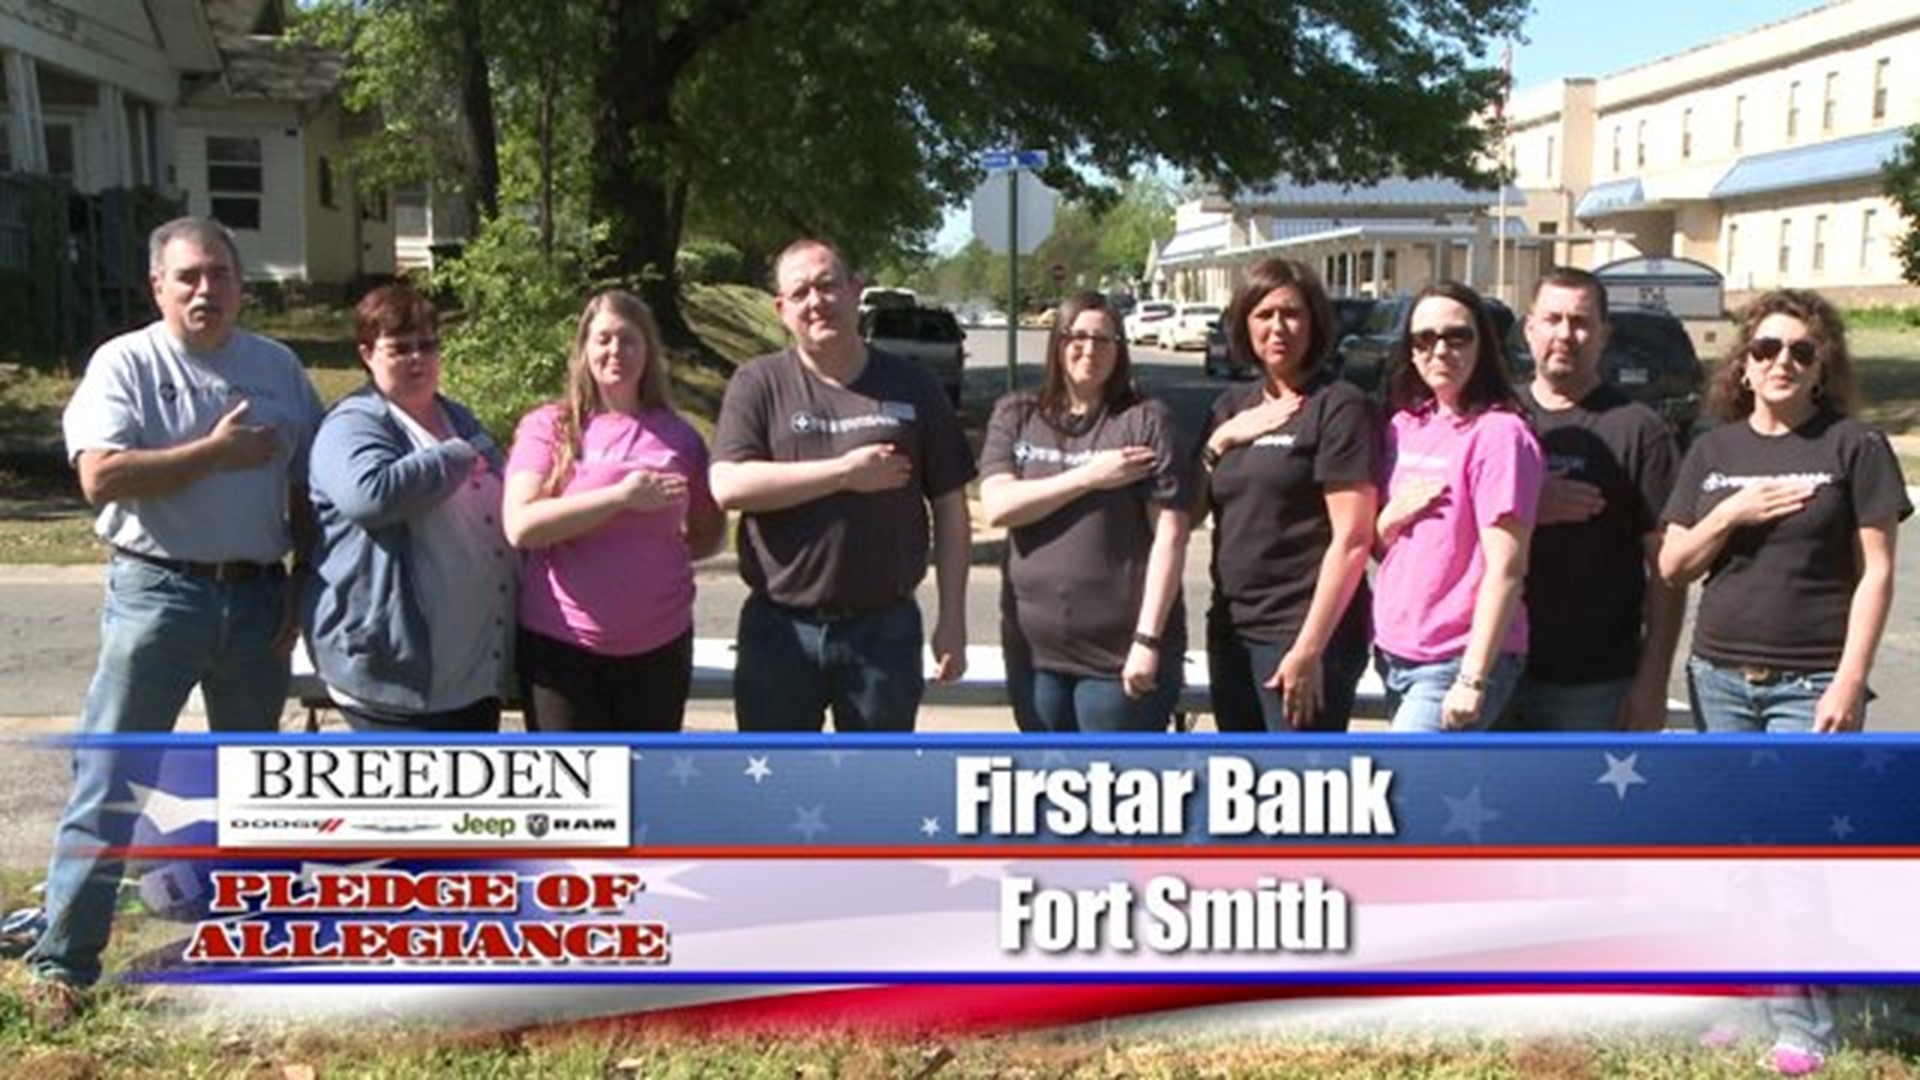 Firstar Bank, Fort Smith